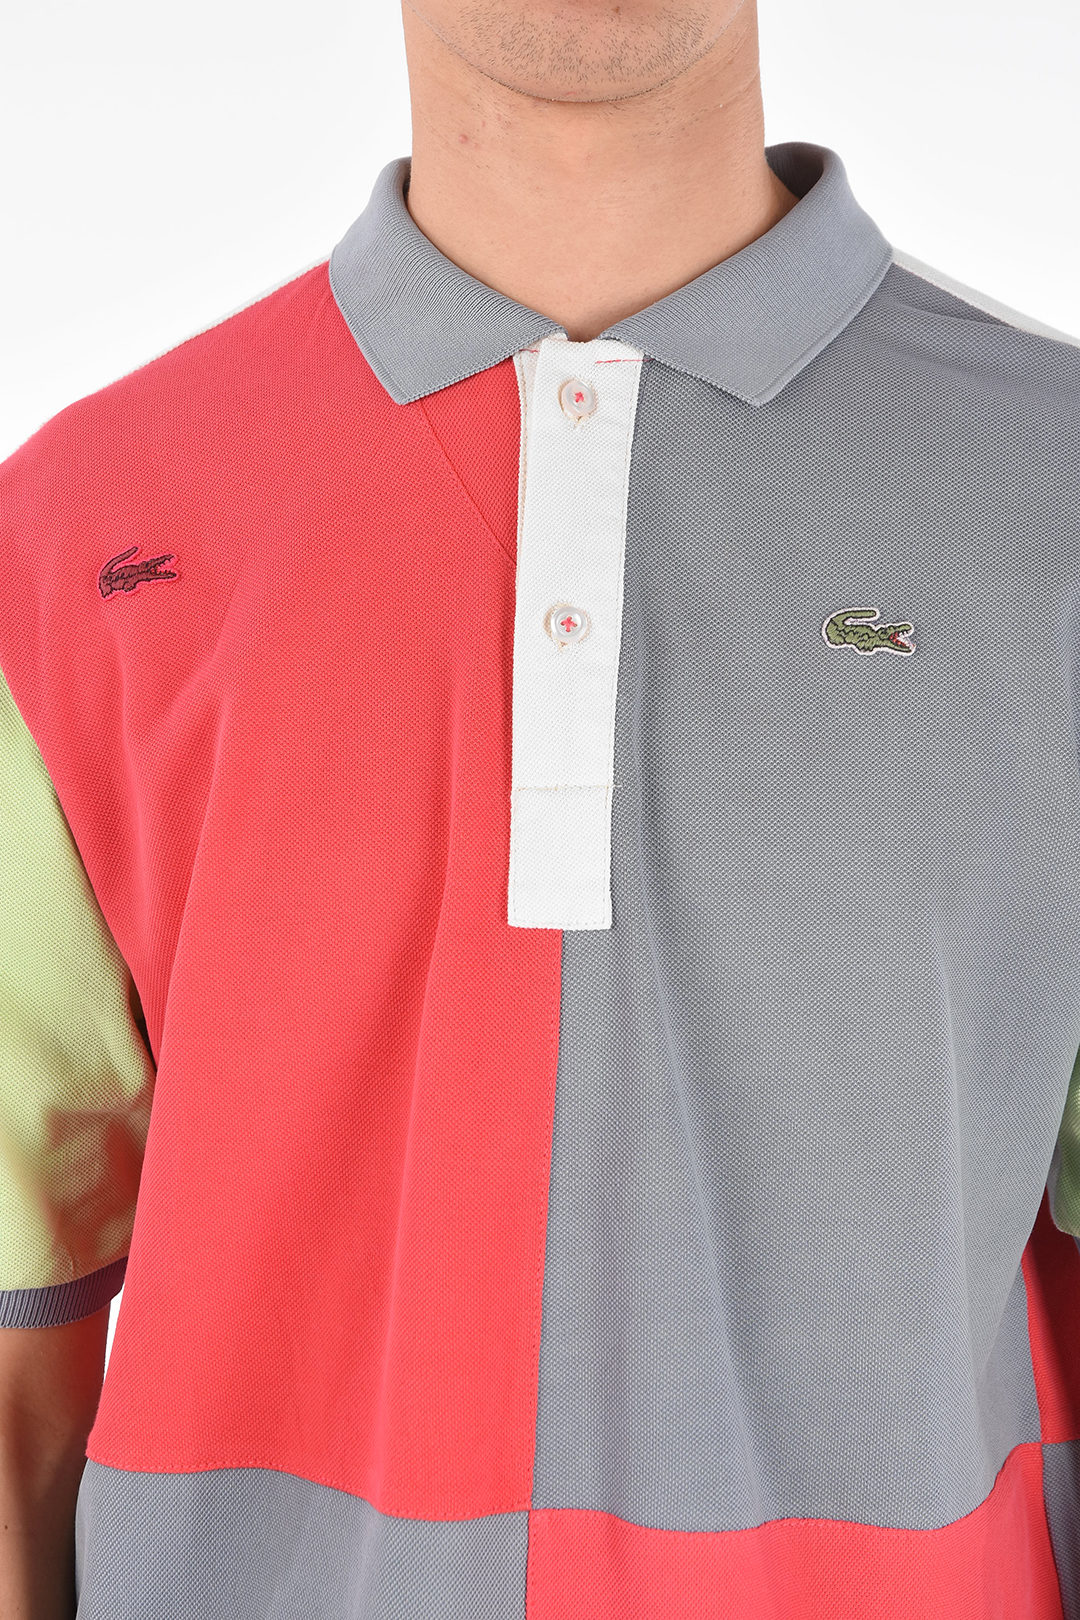 DDPR Customized LACOSTE Polo Shirt men - Outlet